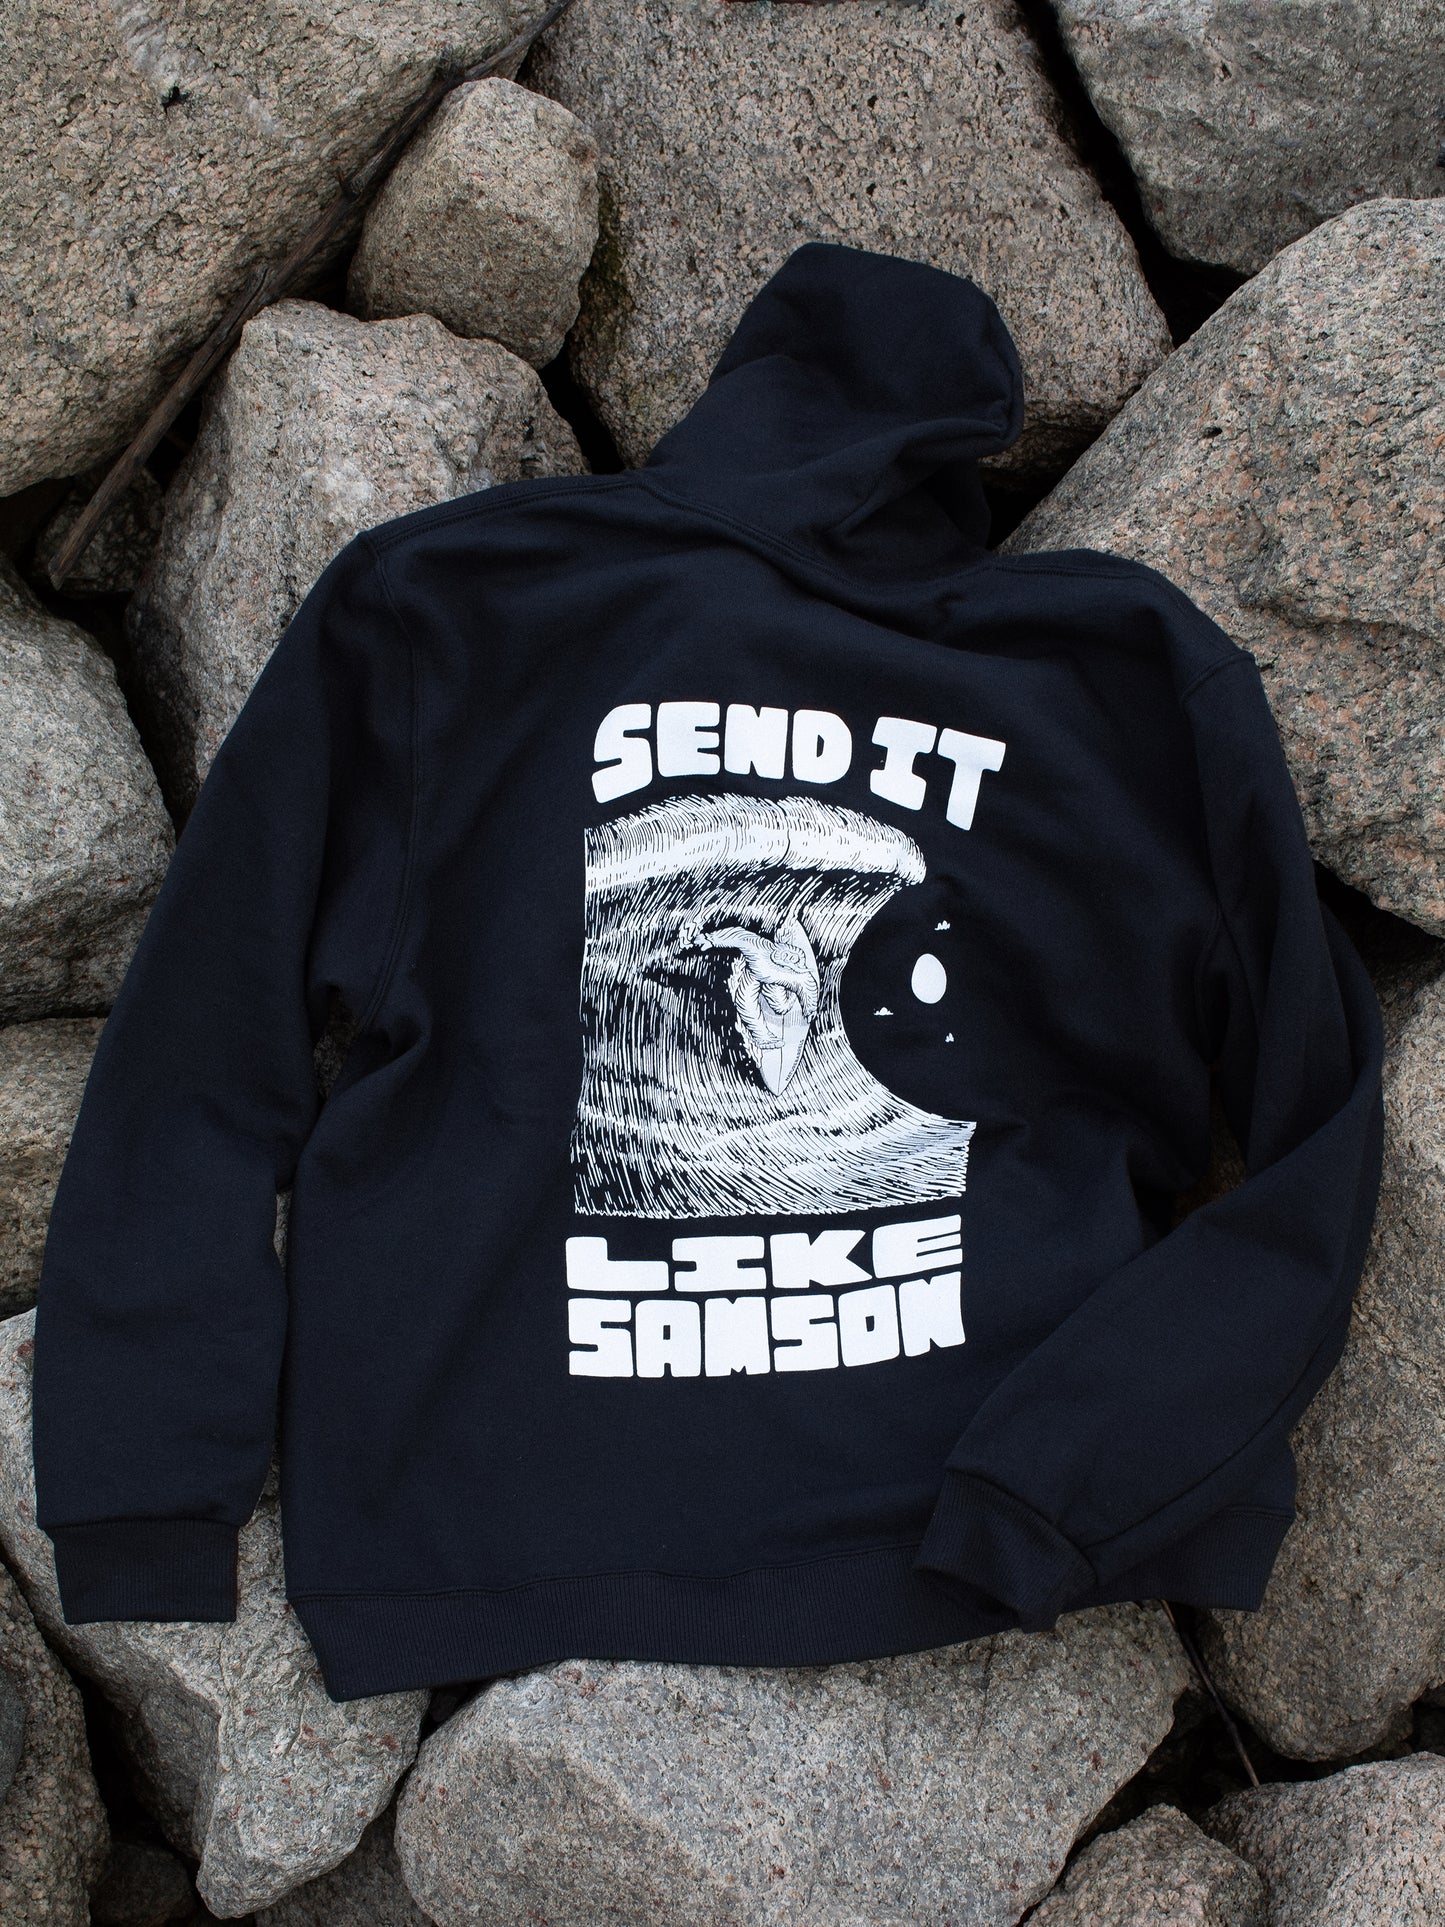 Black hoodie with large white graphic in the back featuring 'SEND IT LIKE SAMSON' text and an illustration of a sasquatch riding a large wave, laid on a rocky surface.